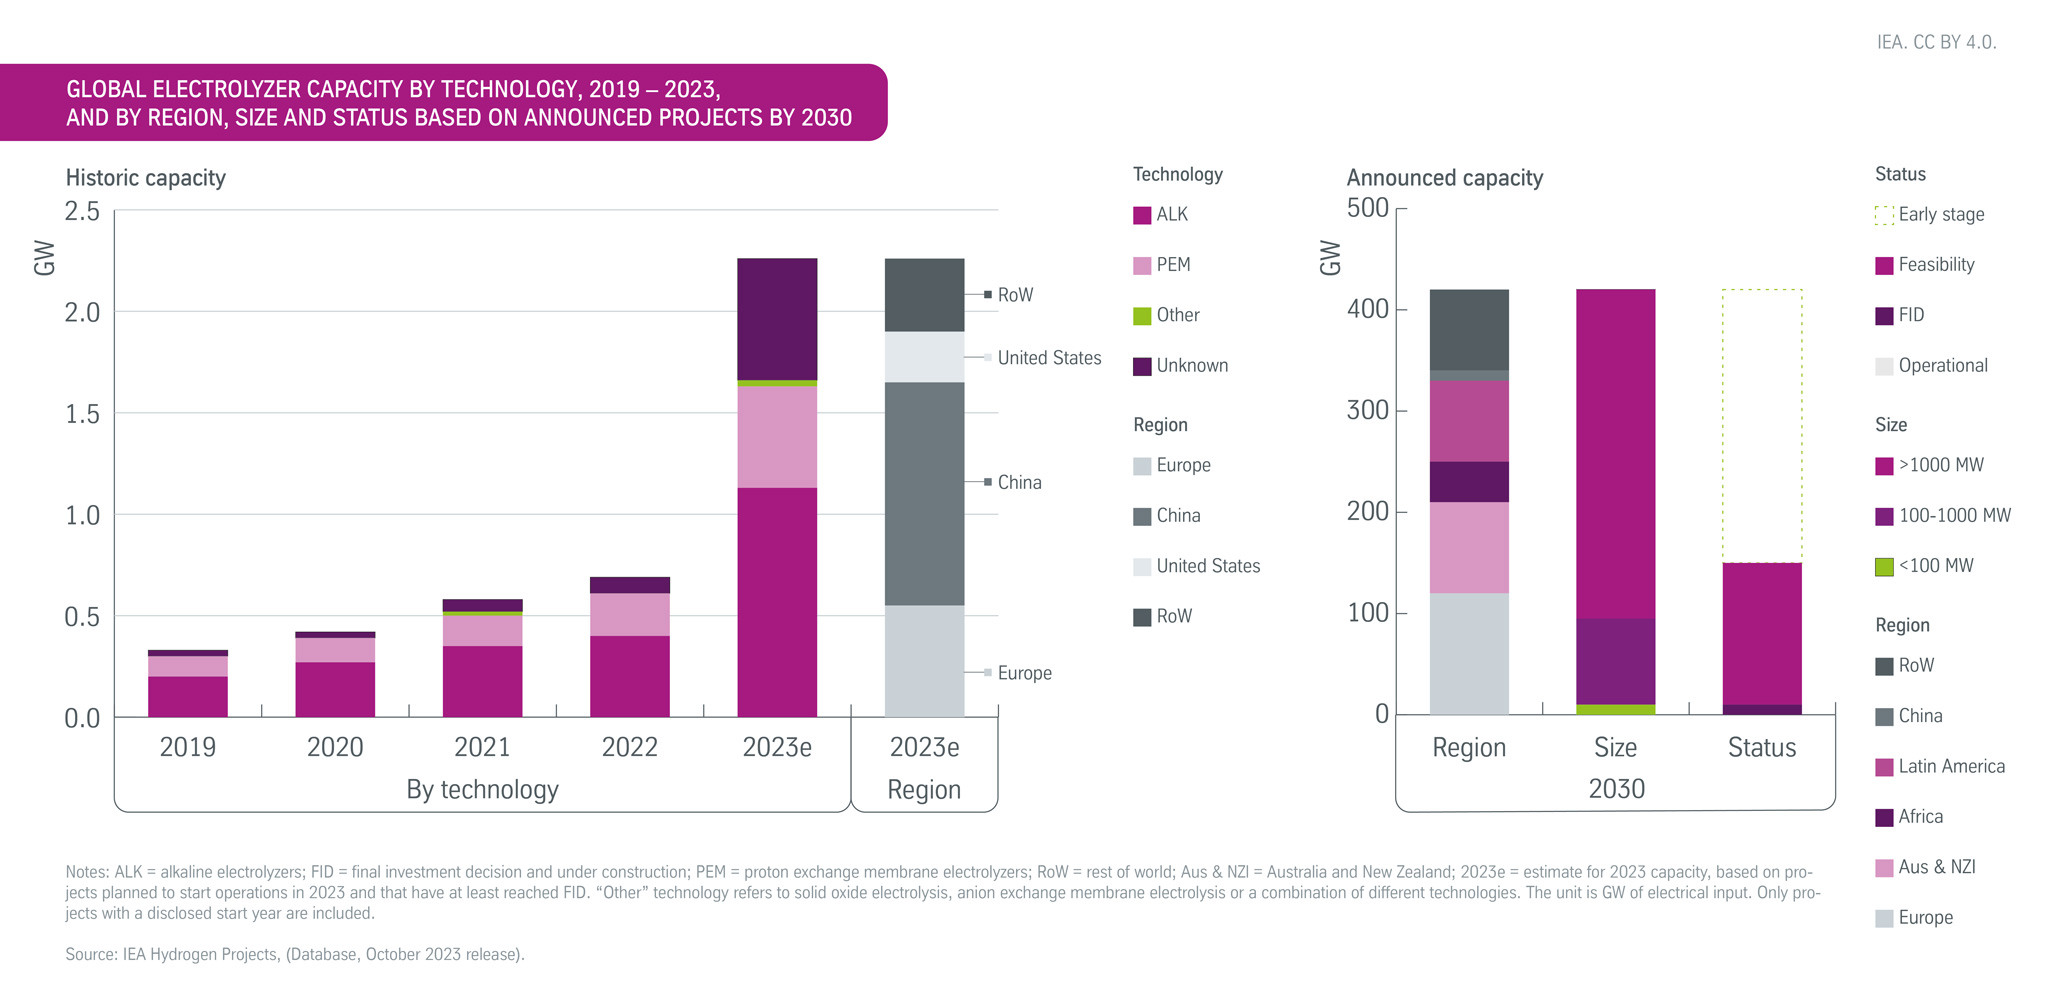 Diagram: Global Electrolyzer Capacity by Technology, Region, Size and Status based on announced projects by 2030